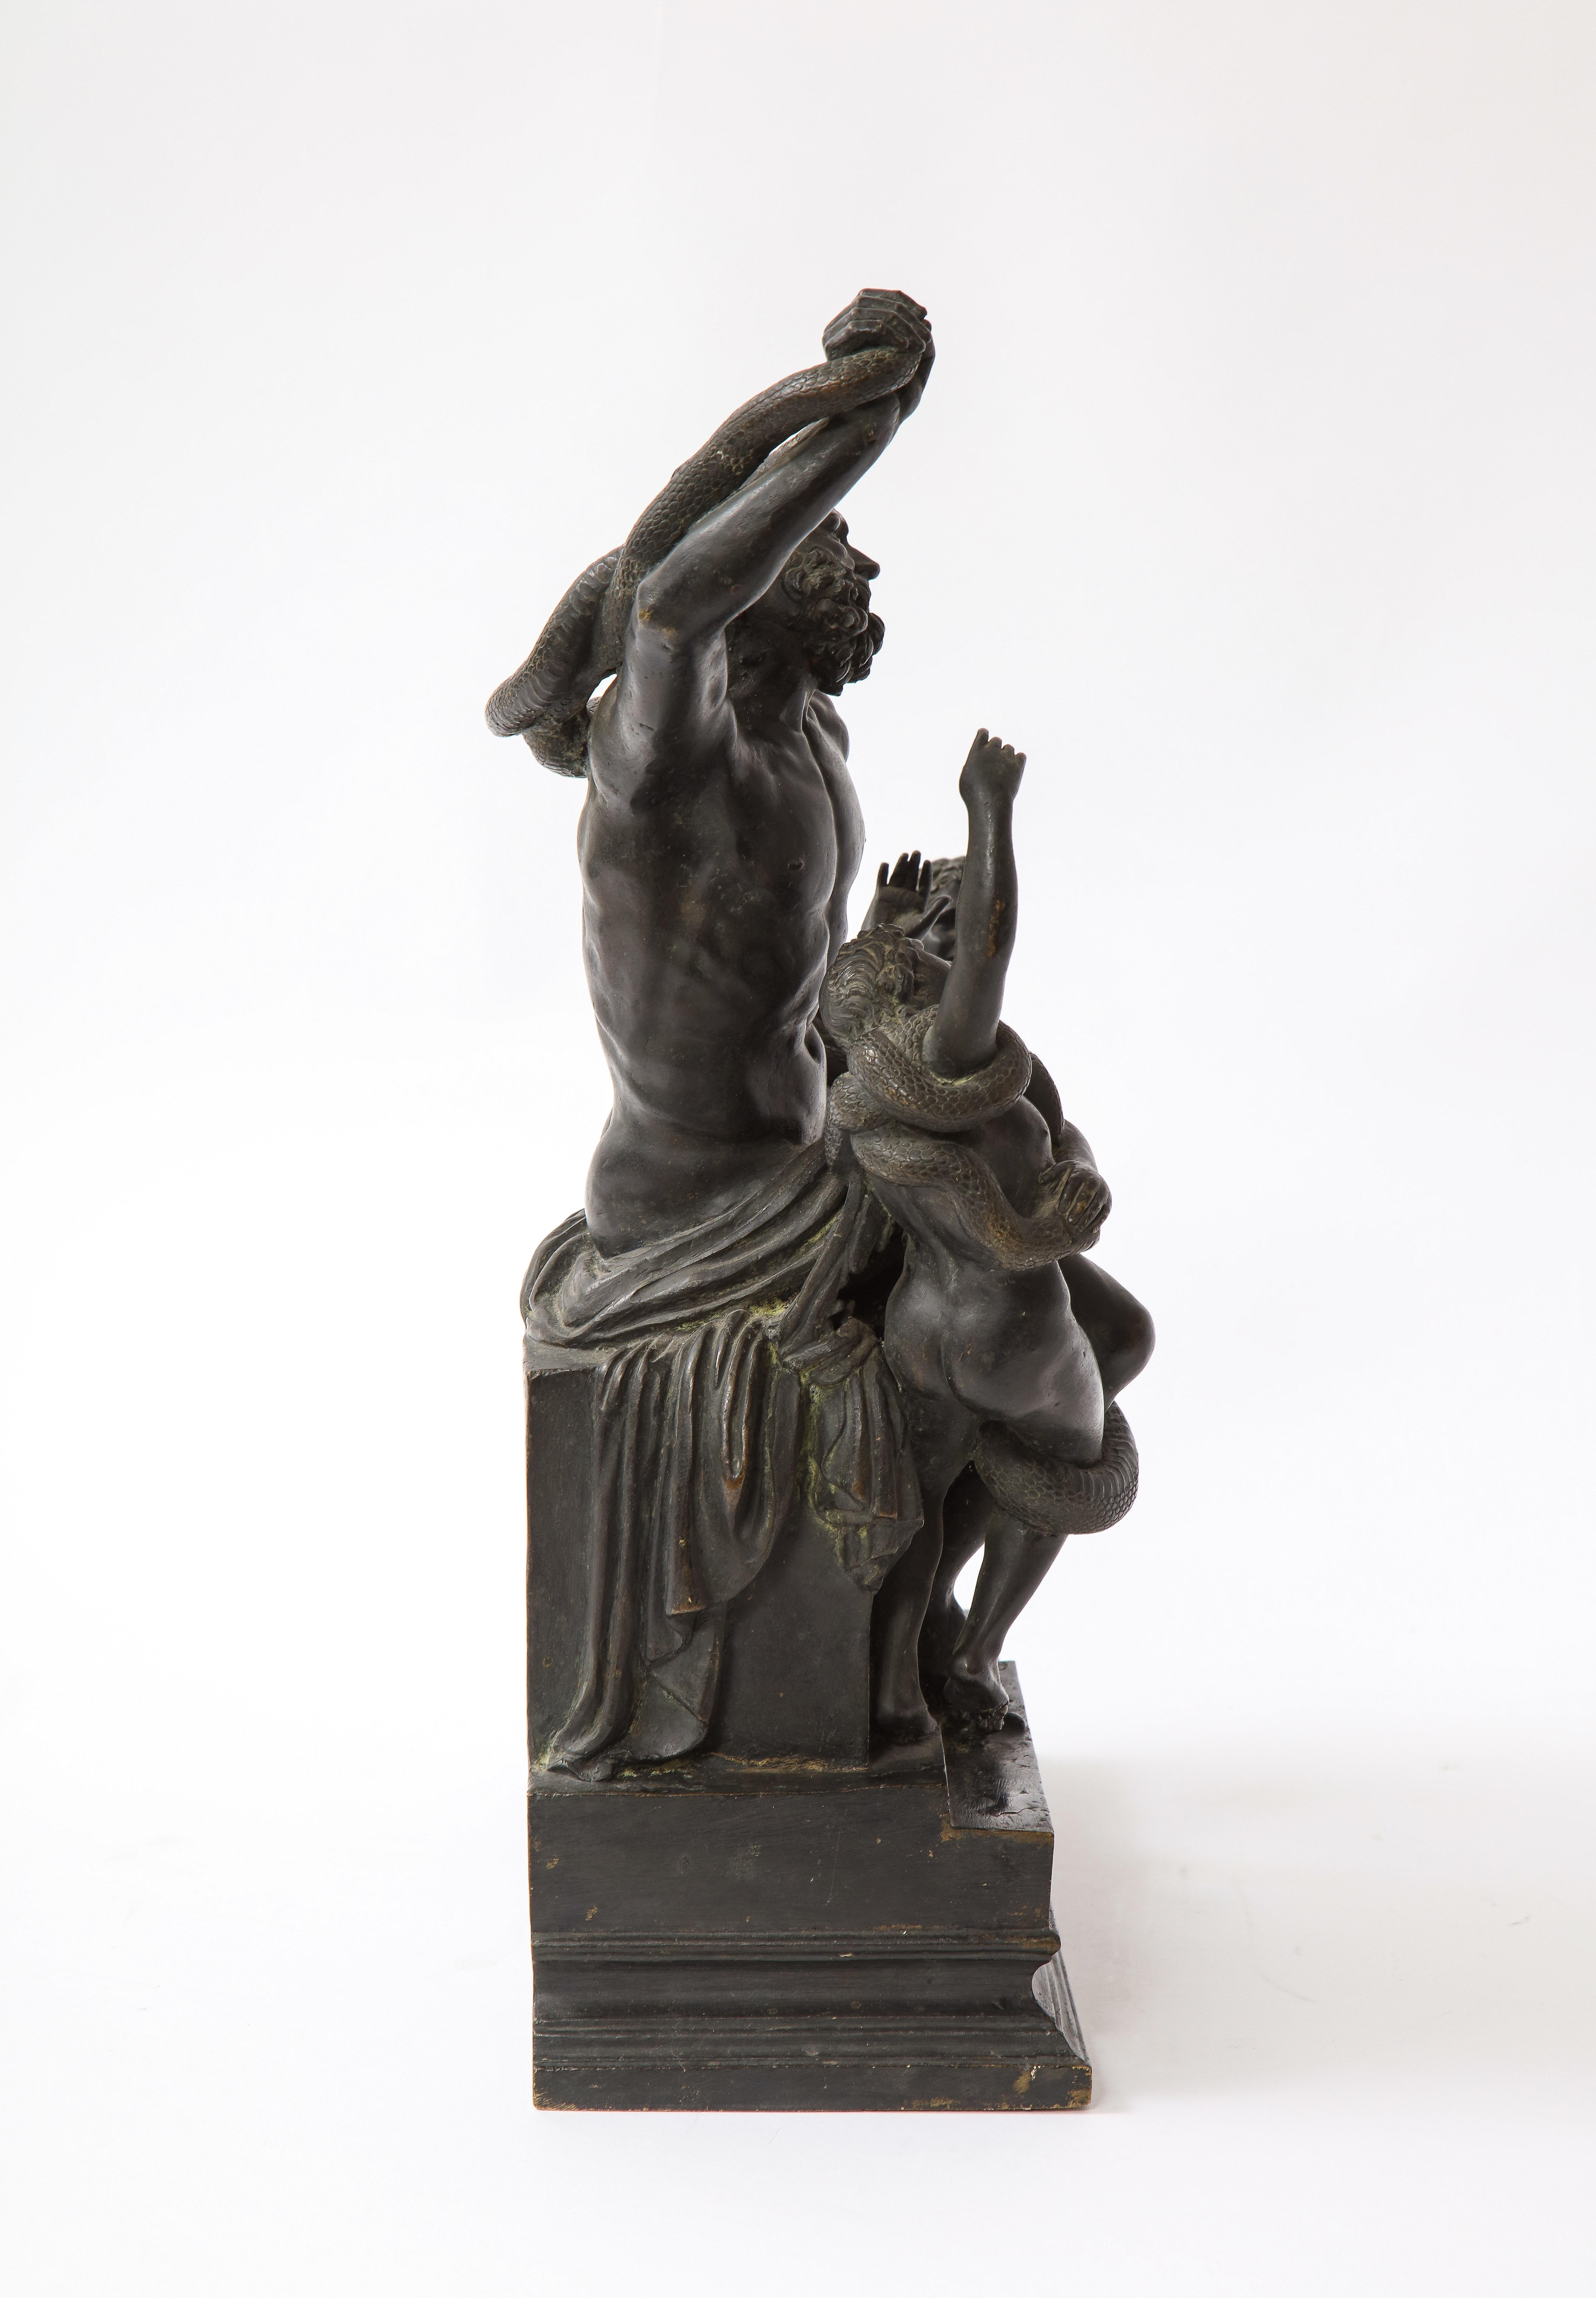 Cast An Early, Late 17th to 18th Century, Patinated Bronze Model of Laocoön